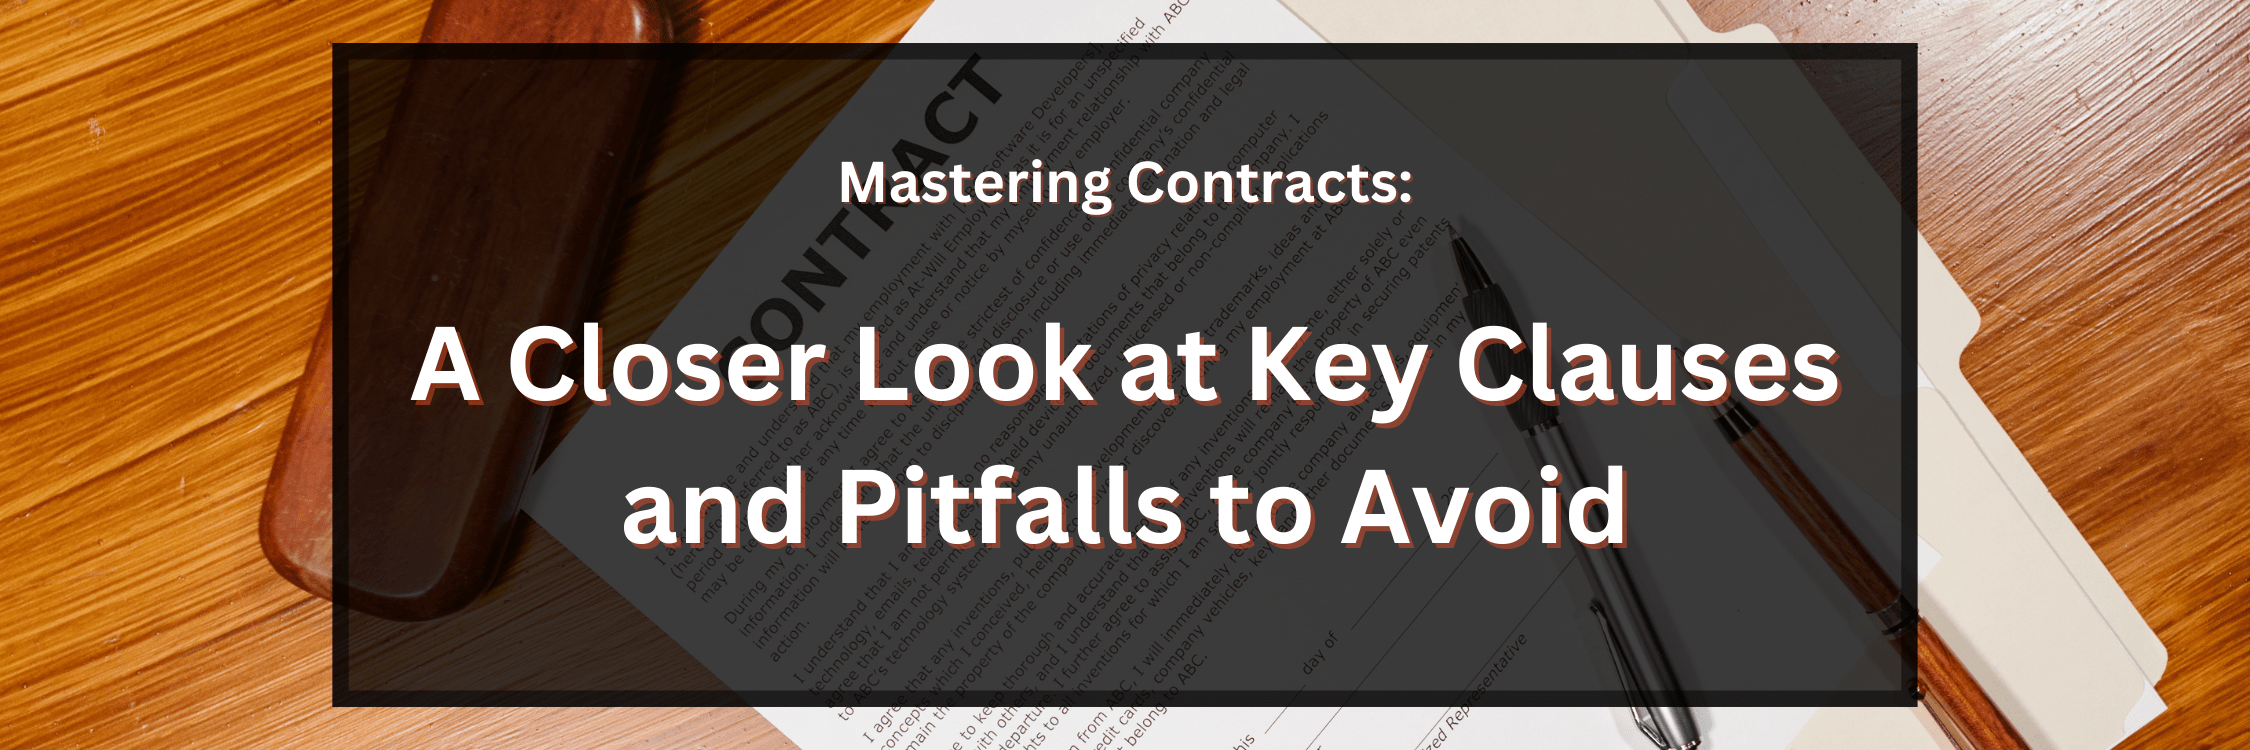 Mastering Contracts A Closer Look At Key Clauses And Pitfalls To Avoid